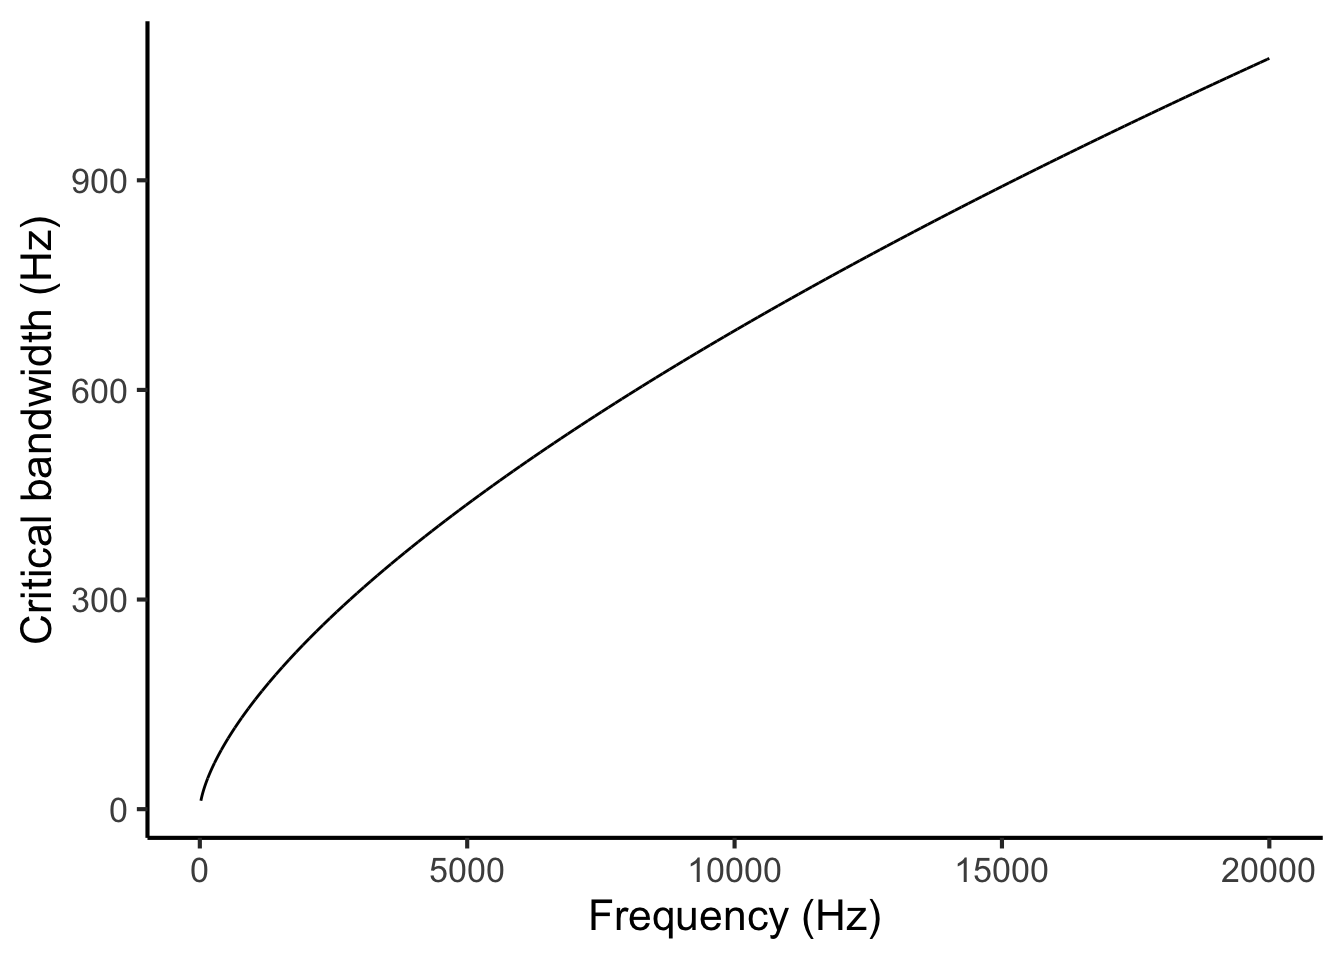 Critical bandwidth as a function of frequency.